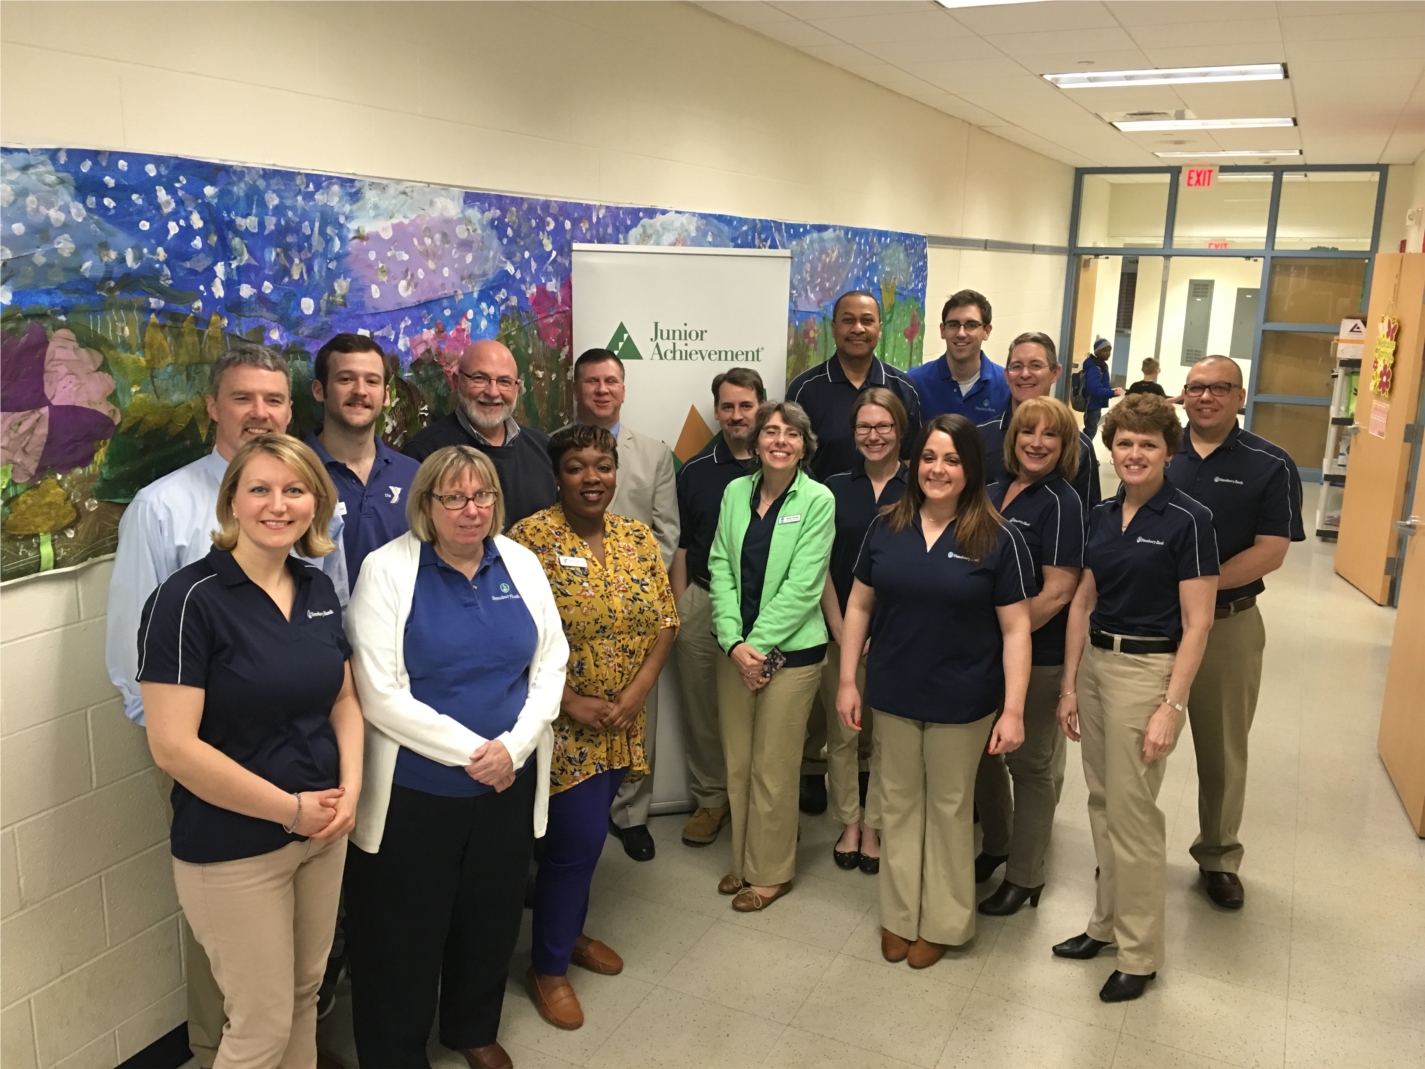 Simsbury Bank employees join with other local companies to teach the "JA in a Day" program to all students at Tariffville Elementary School in April 2018.  